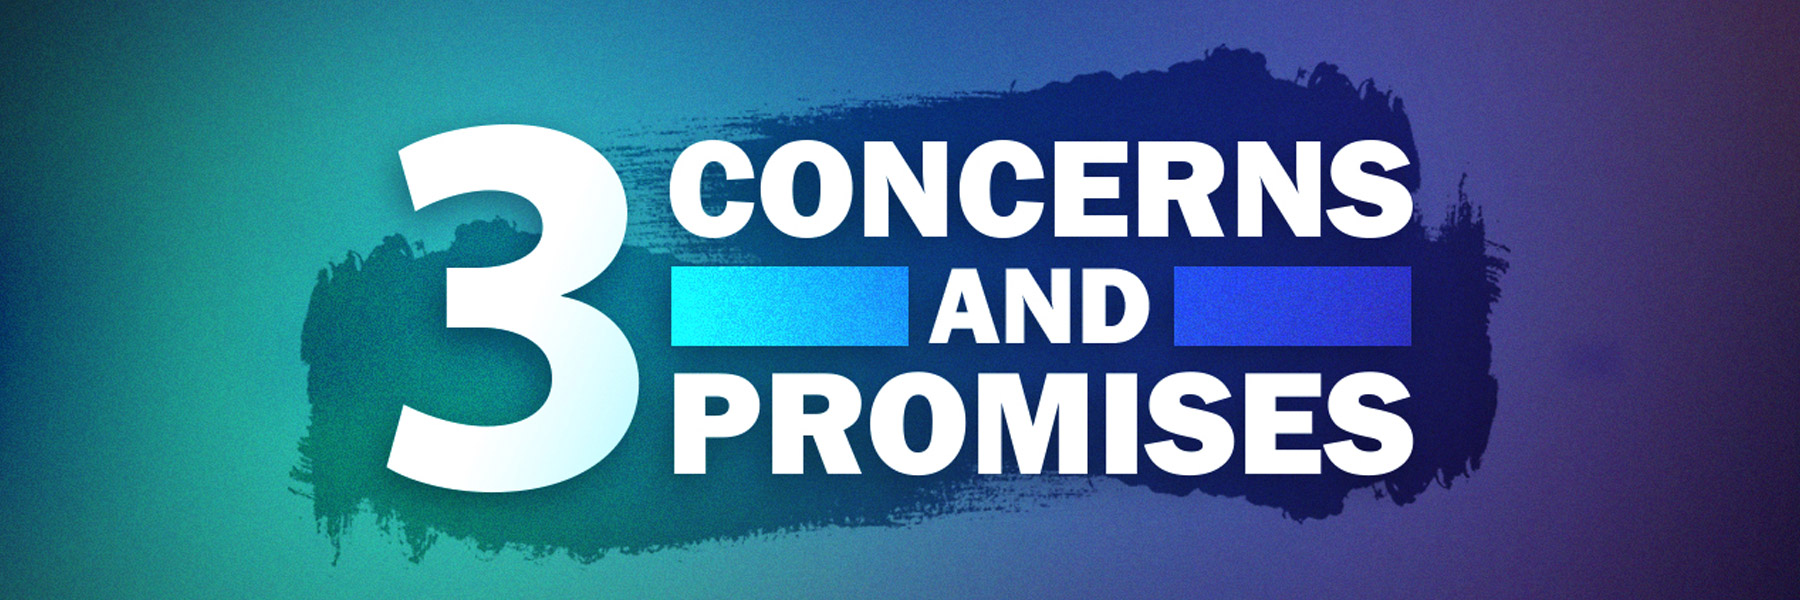 3 Concerns and 3 Promises